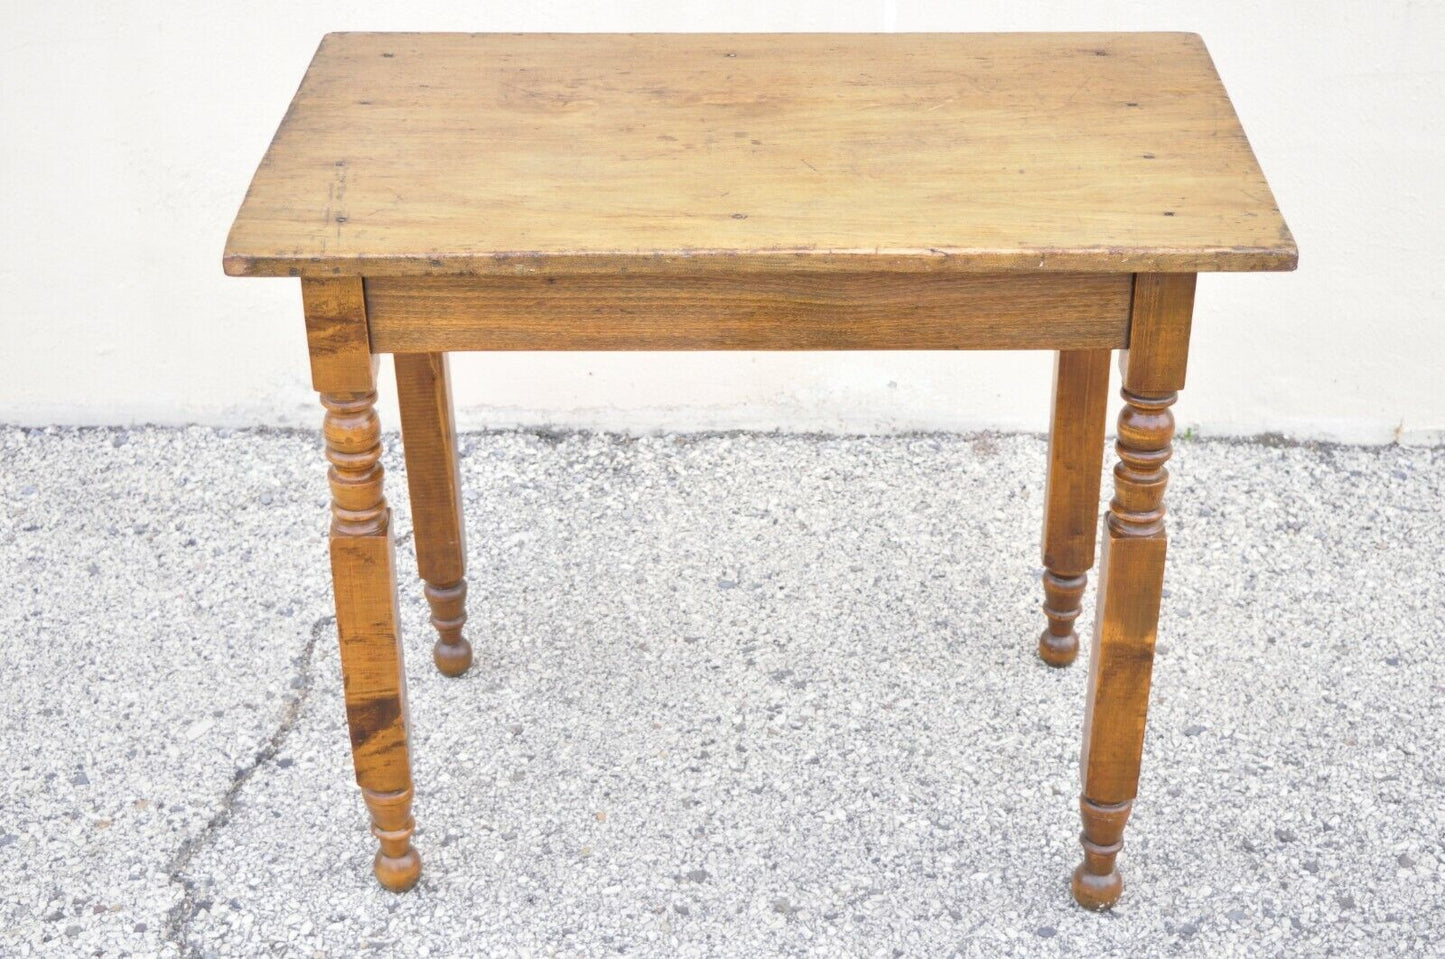 19th American Colonial Walnut Maple Small Desk Side Table with Turn Carved Legs